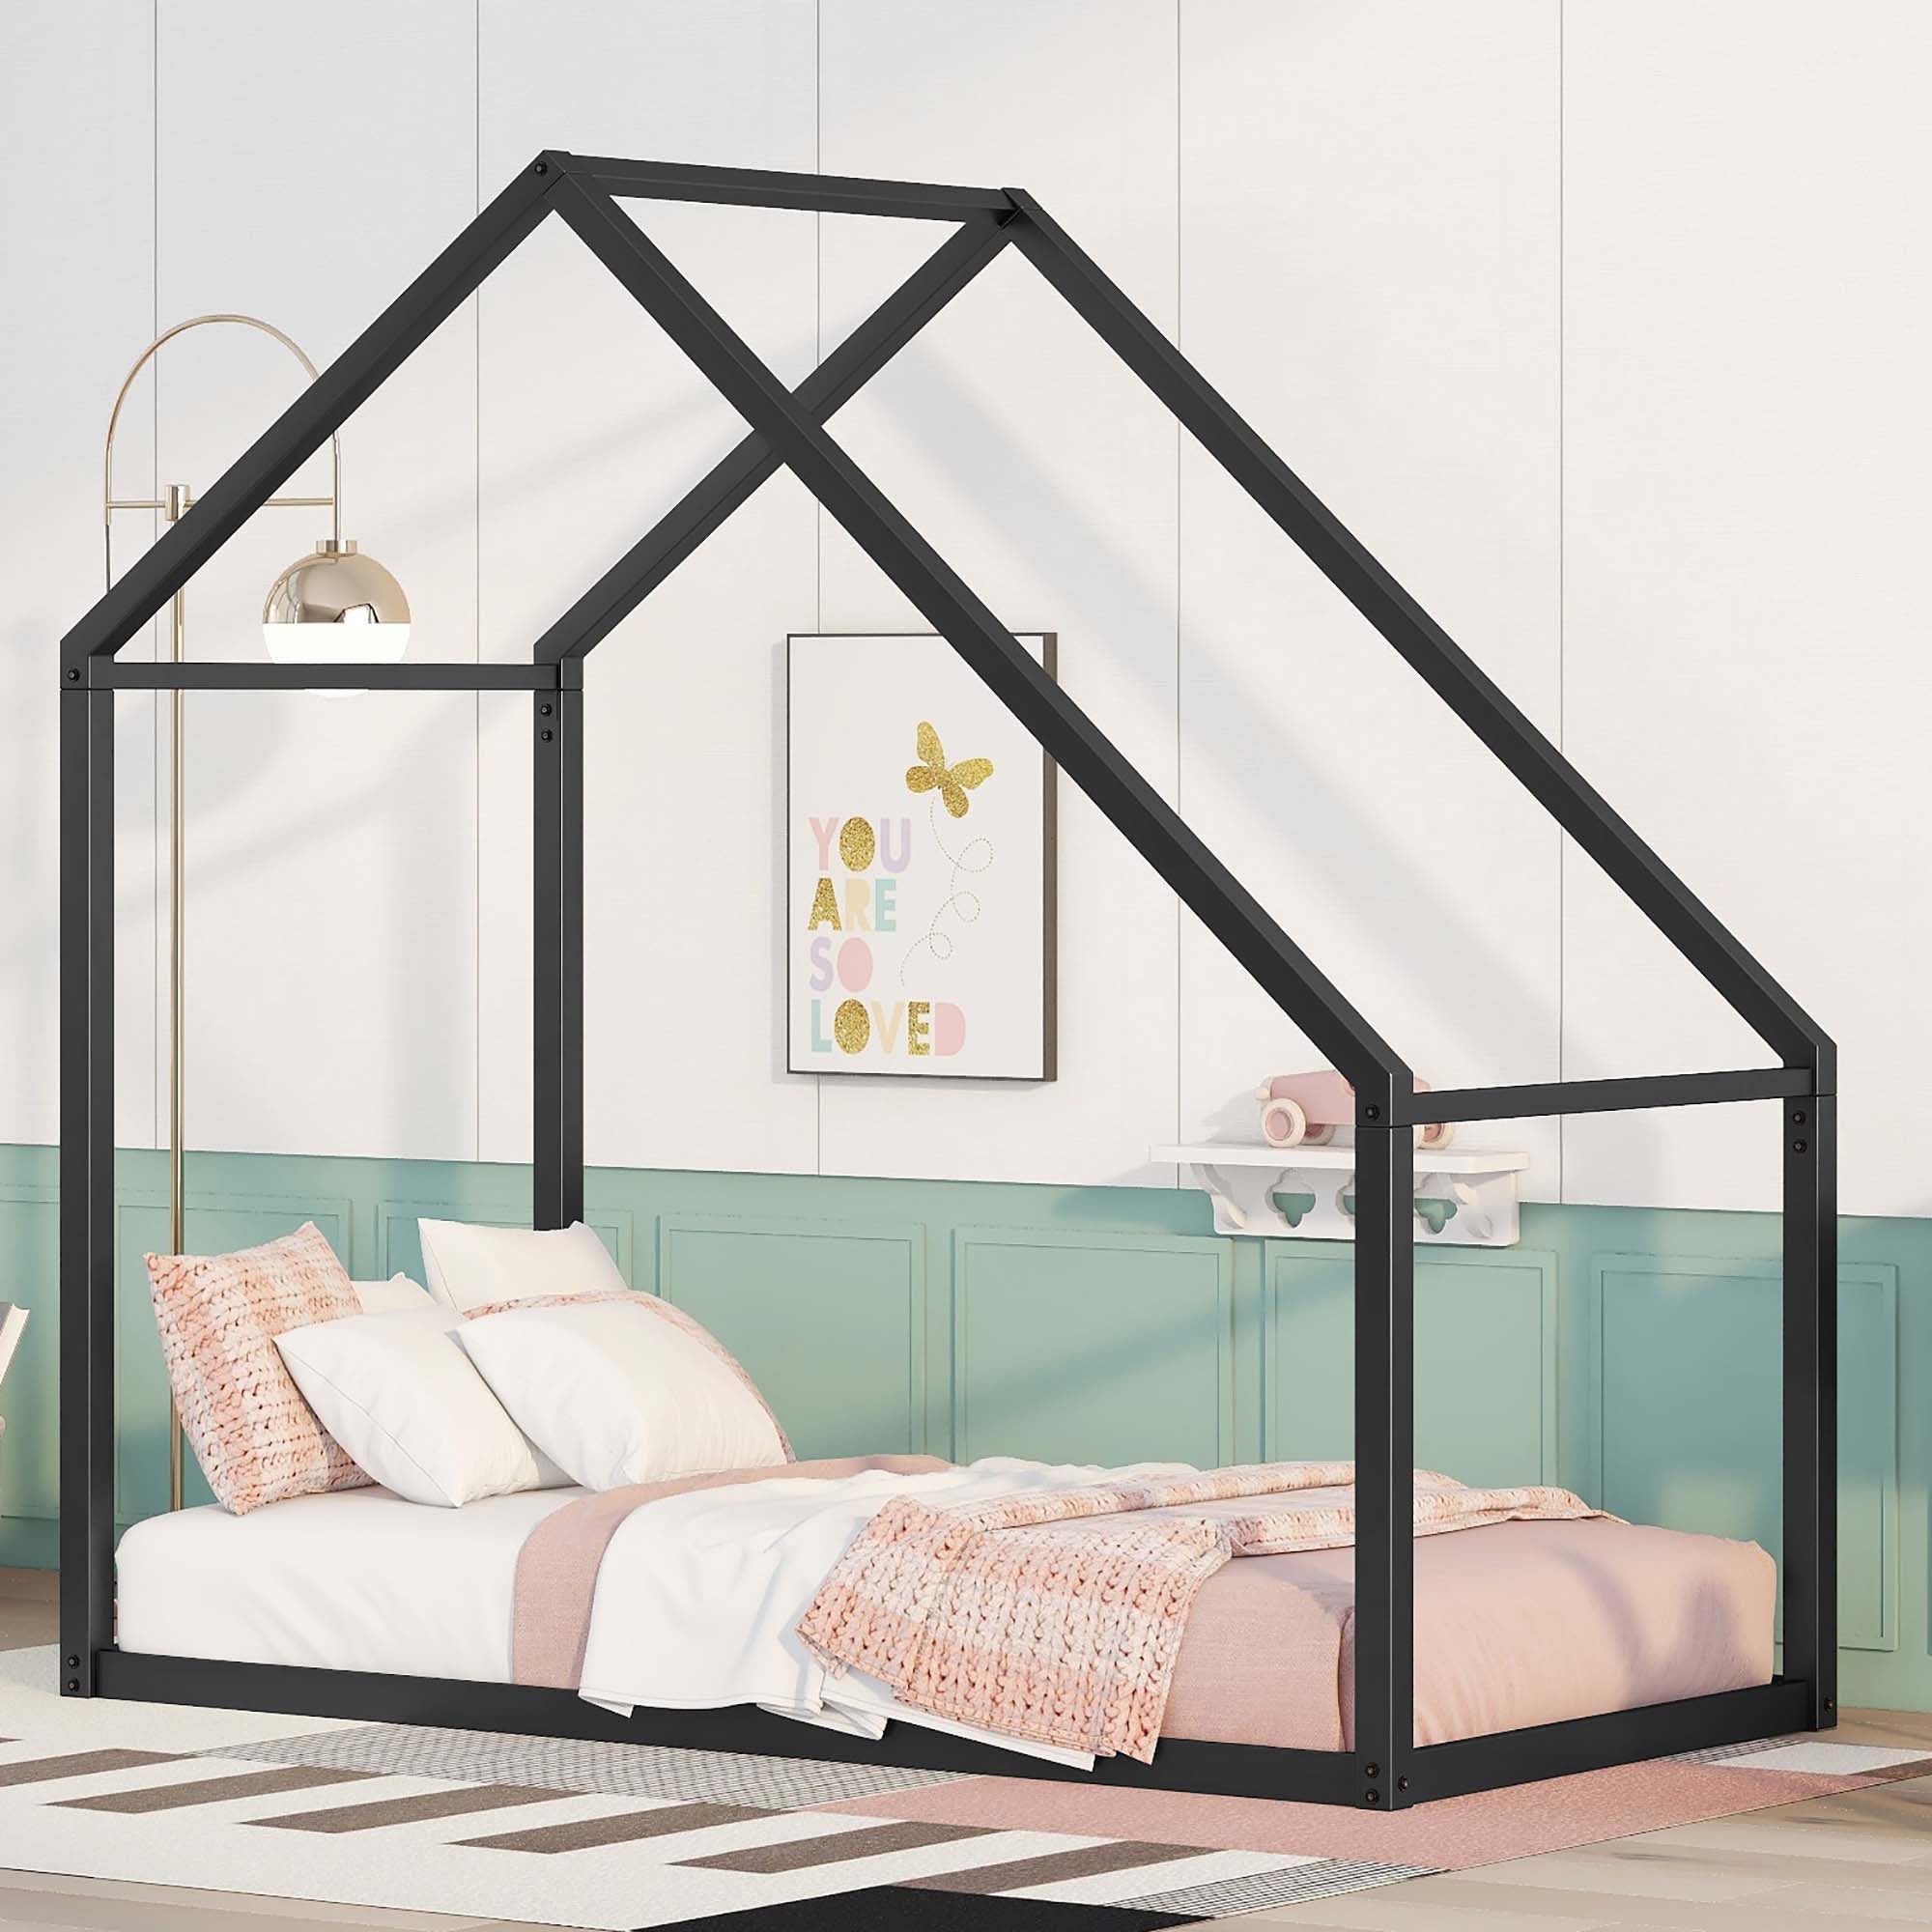 Double Bed Metal Bed Children's Bed, Black, Size 77.2"L x 41"W x73.1"H, This bed provides a safe space for your child to have a good night's sleep